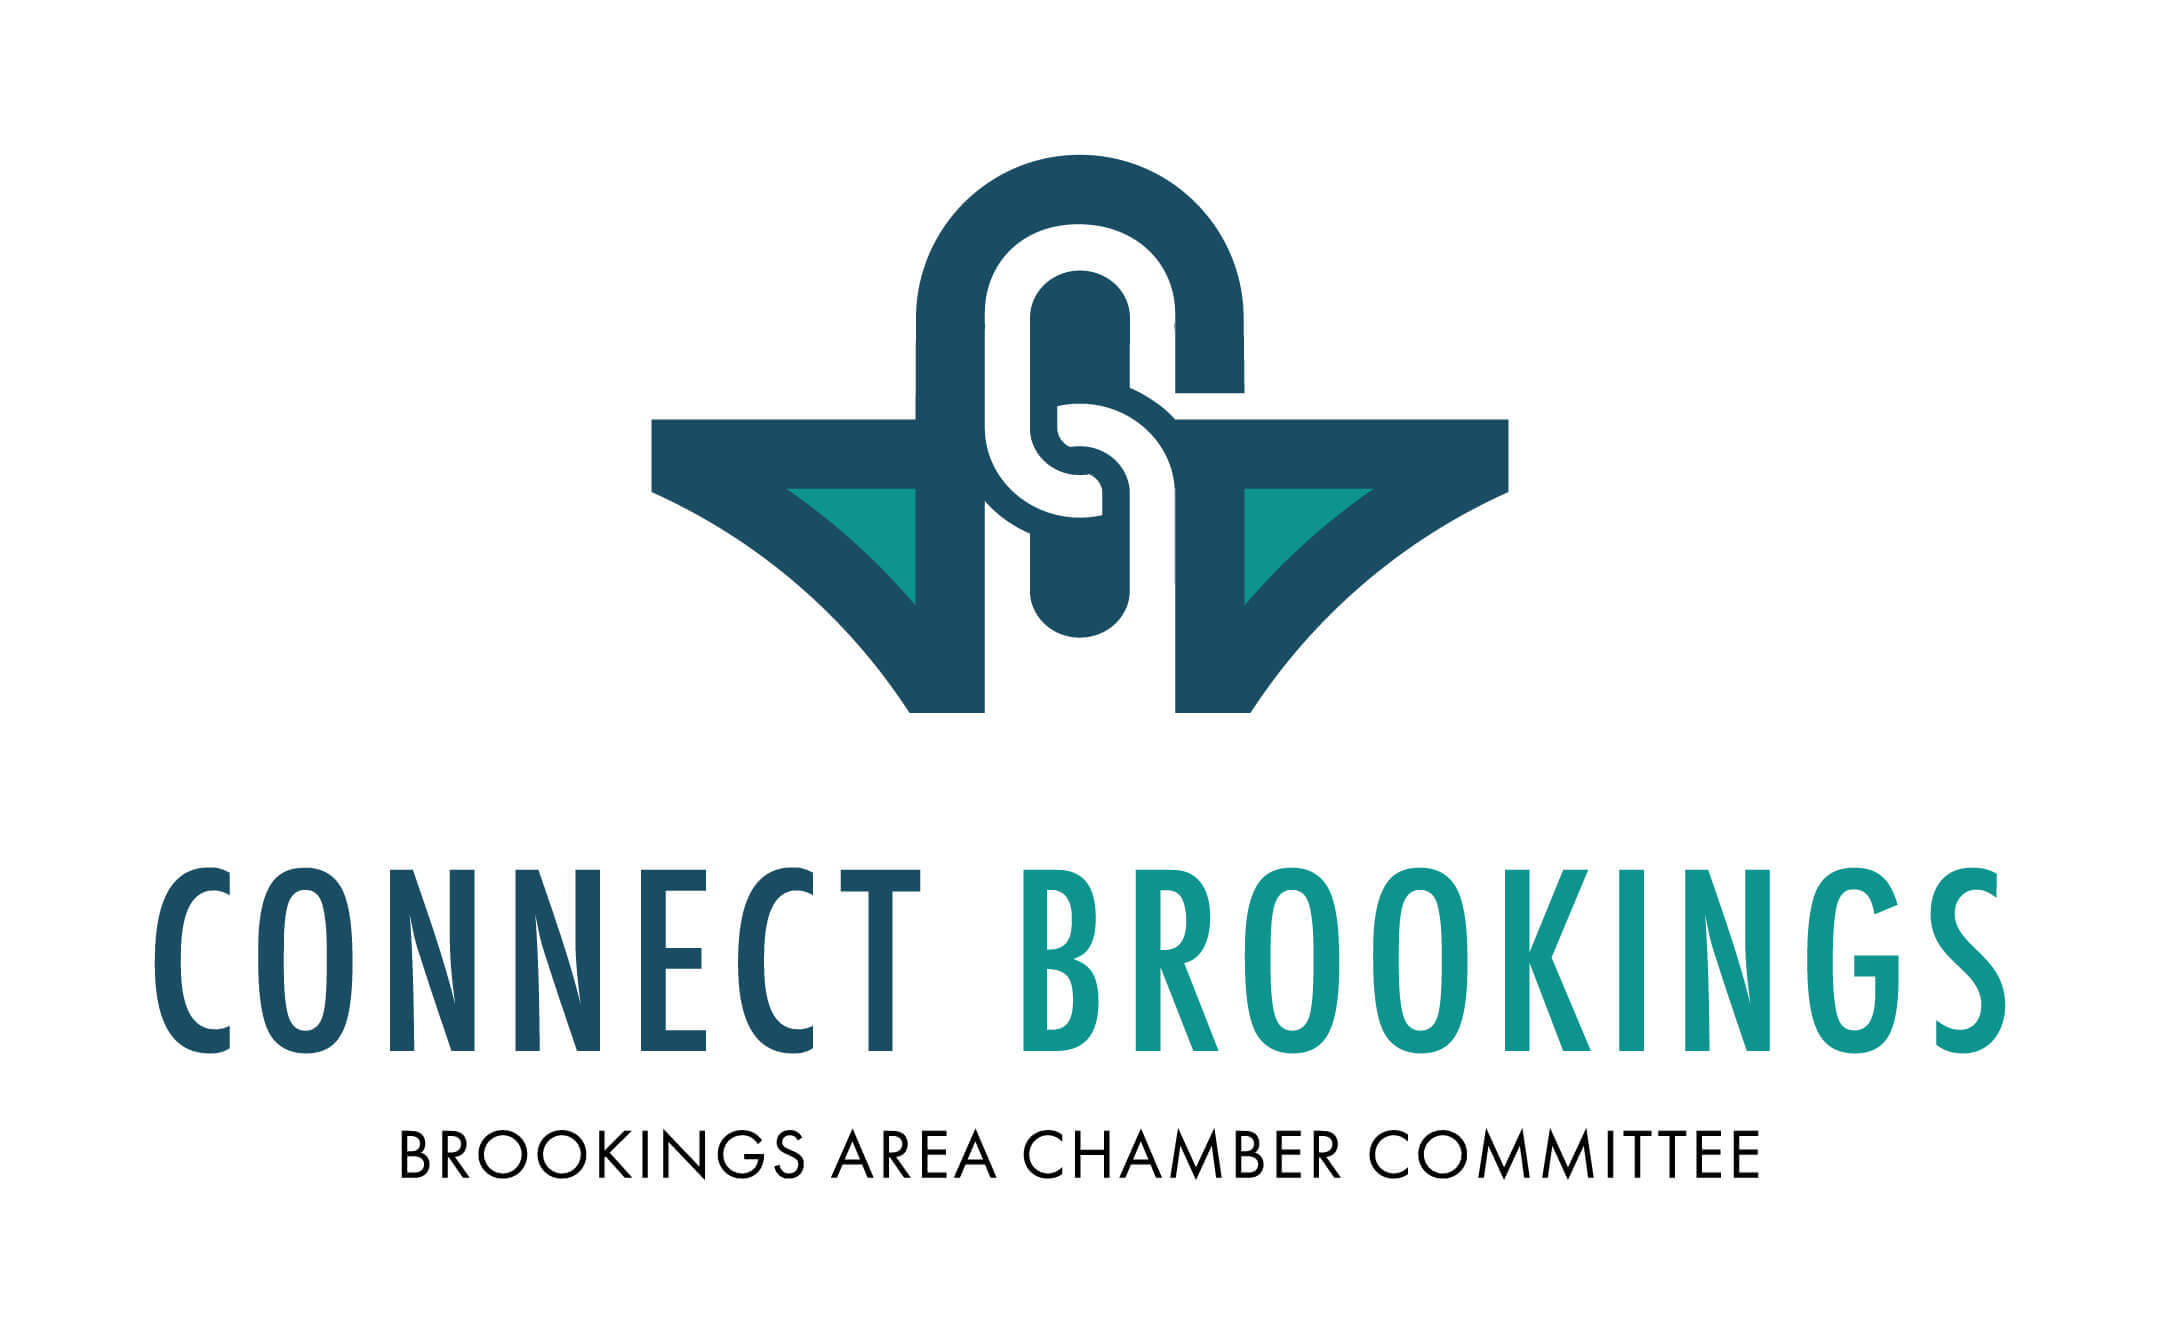 Connect Brookings